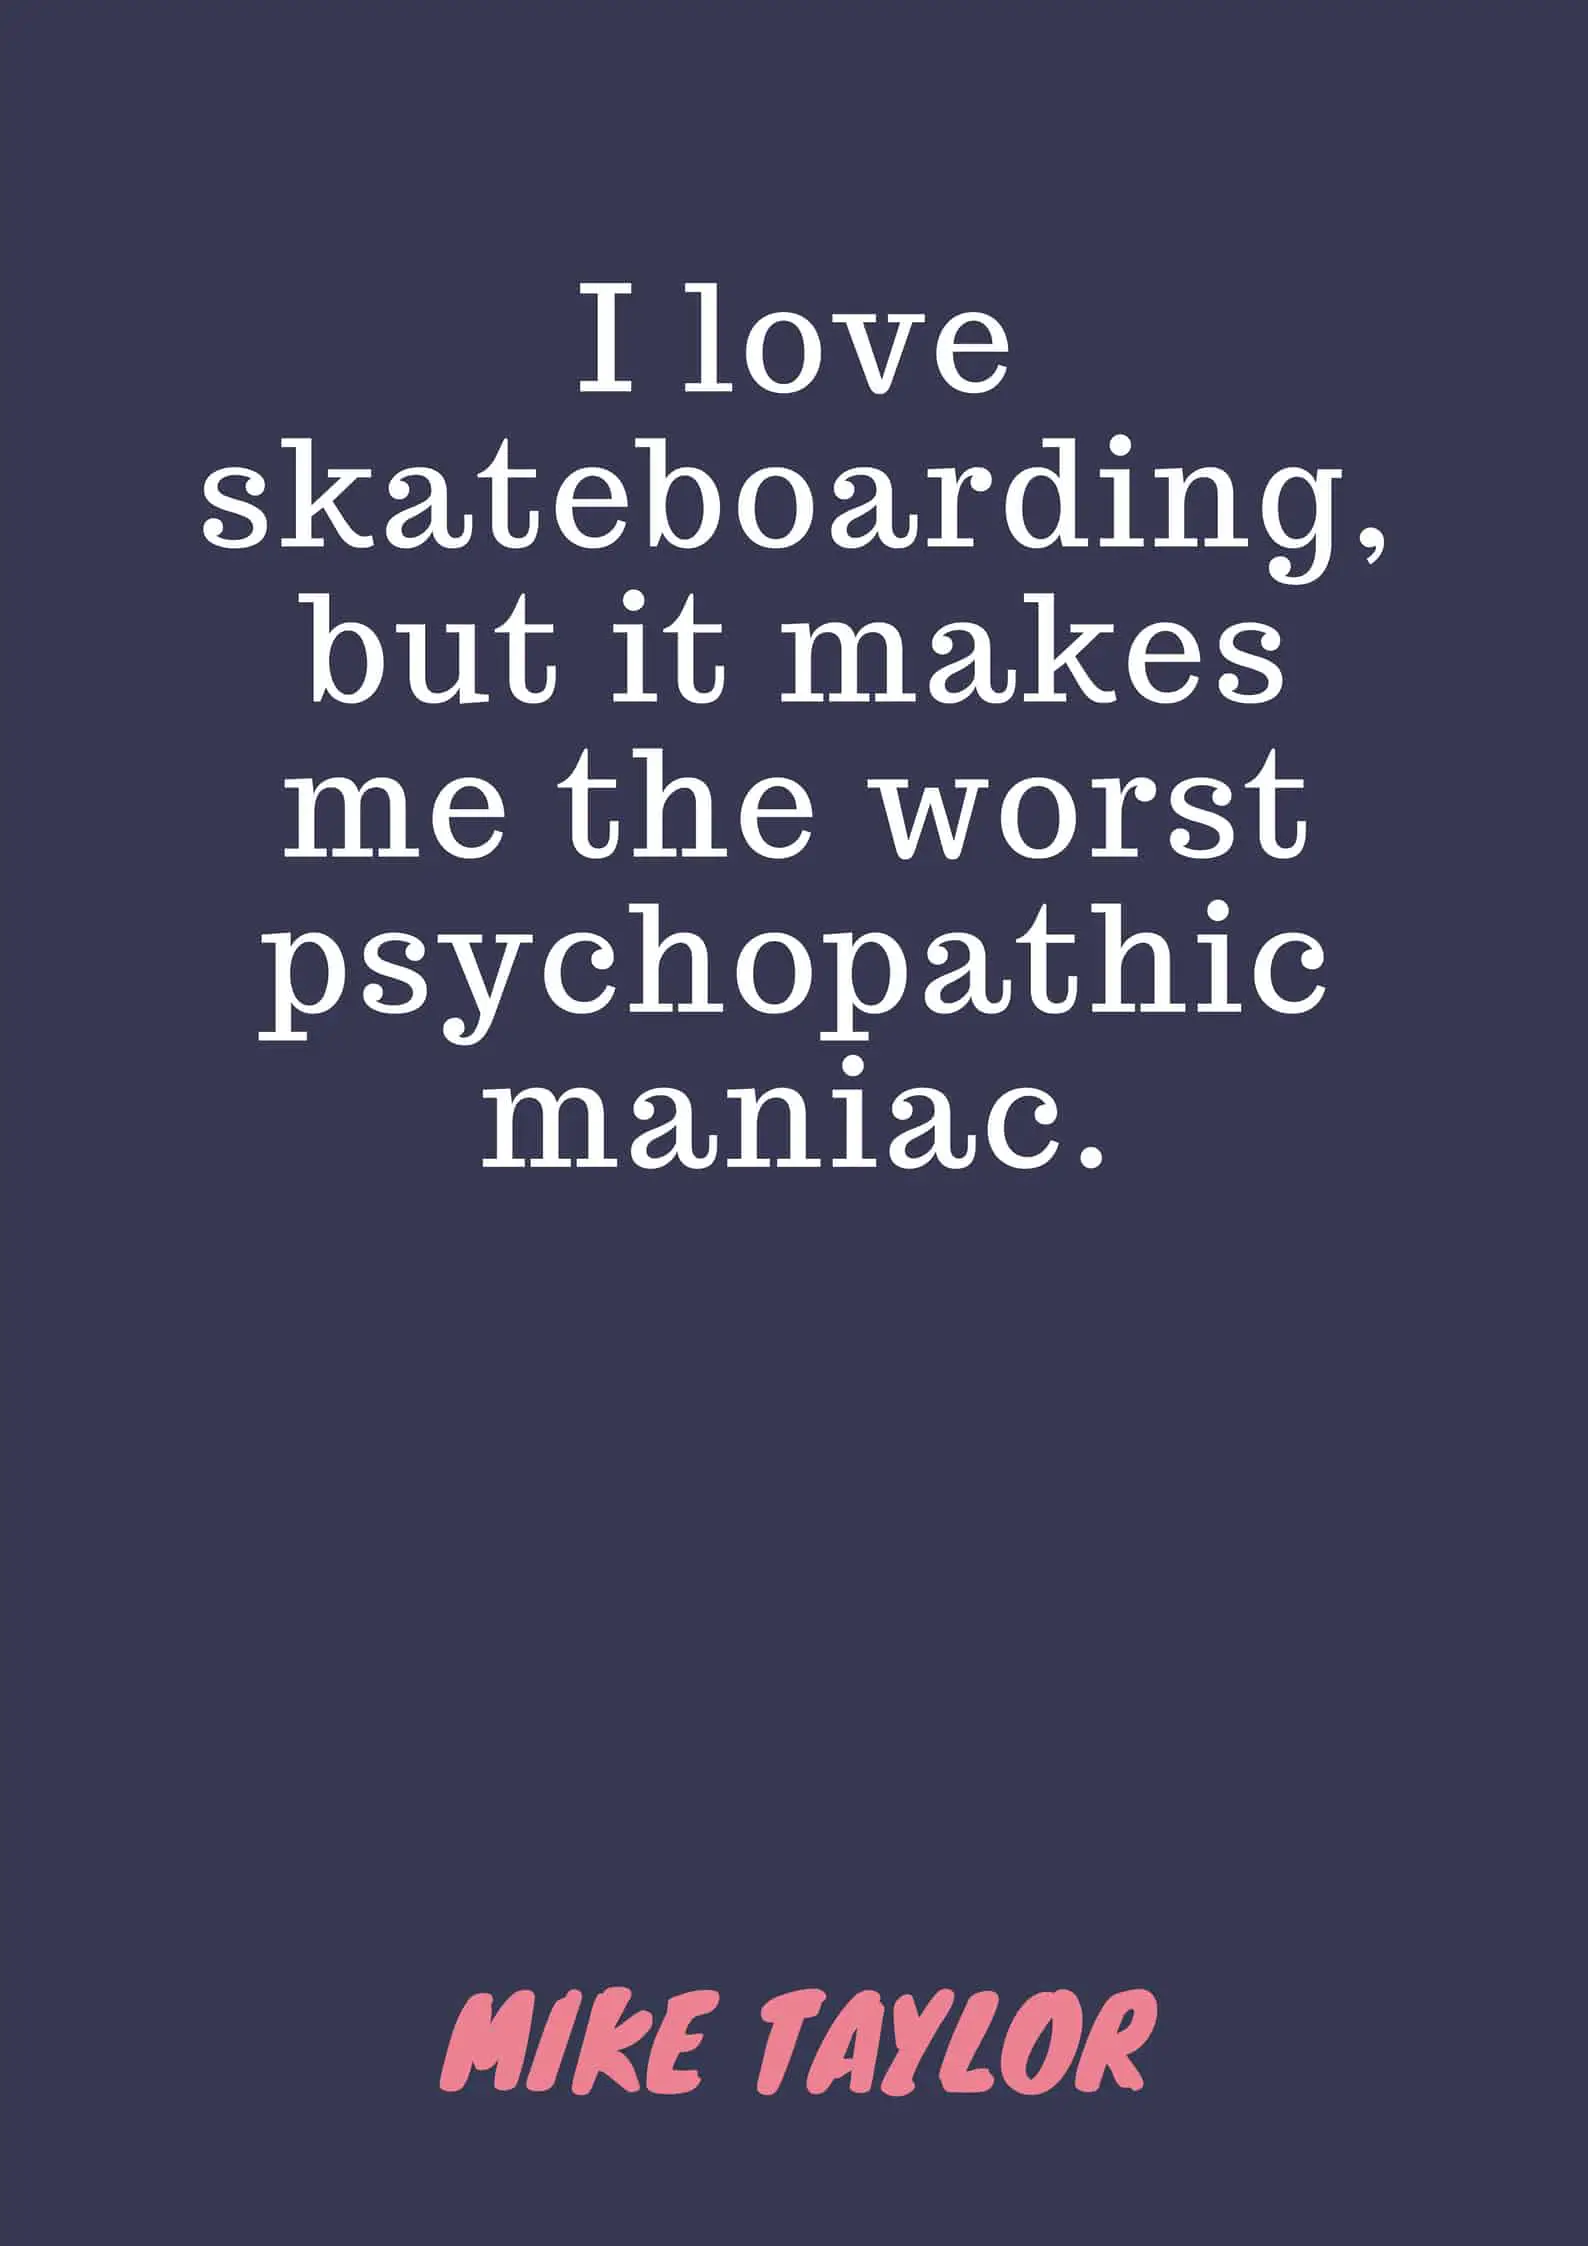 I love skateboarding, but it makes me the worst psychopathic maniac.